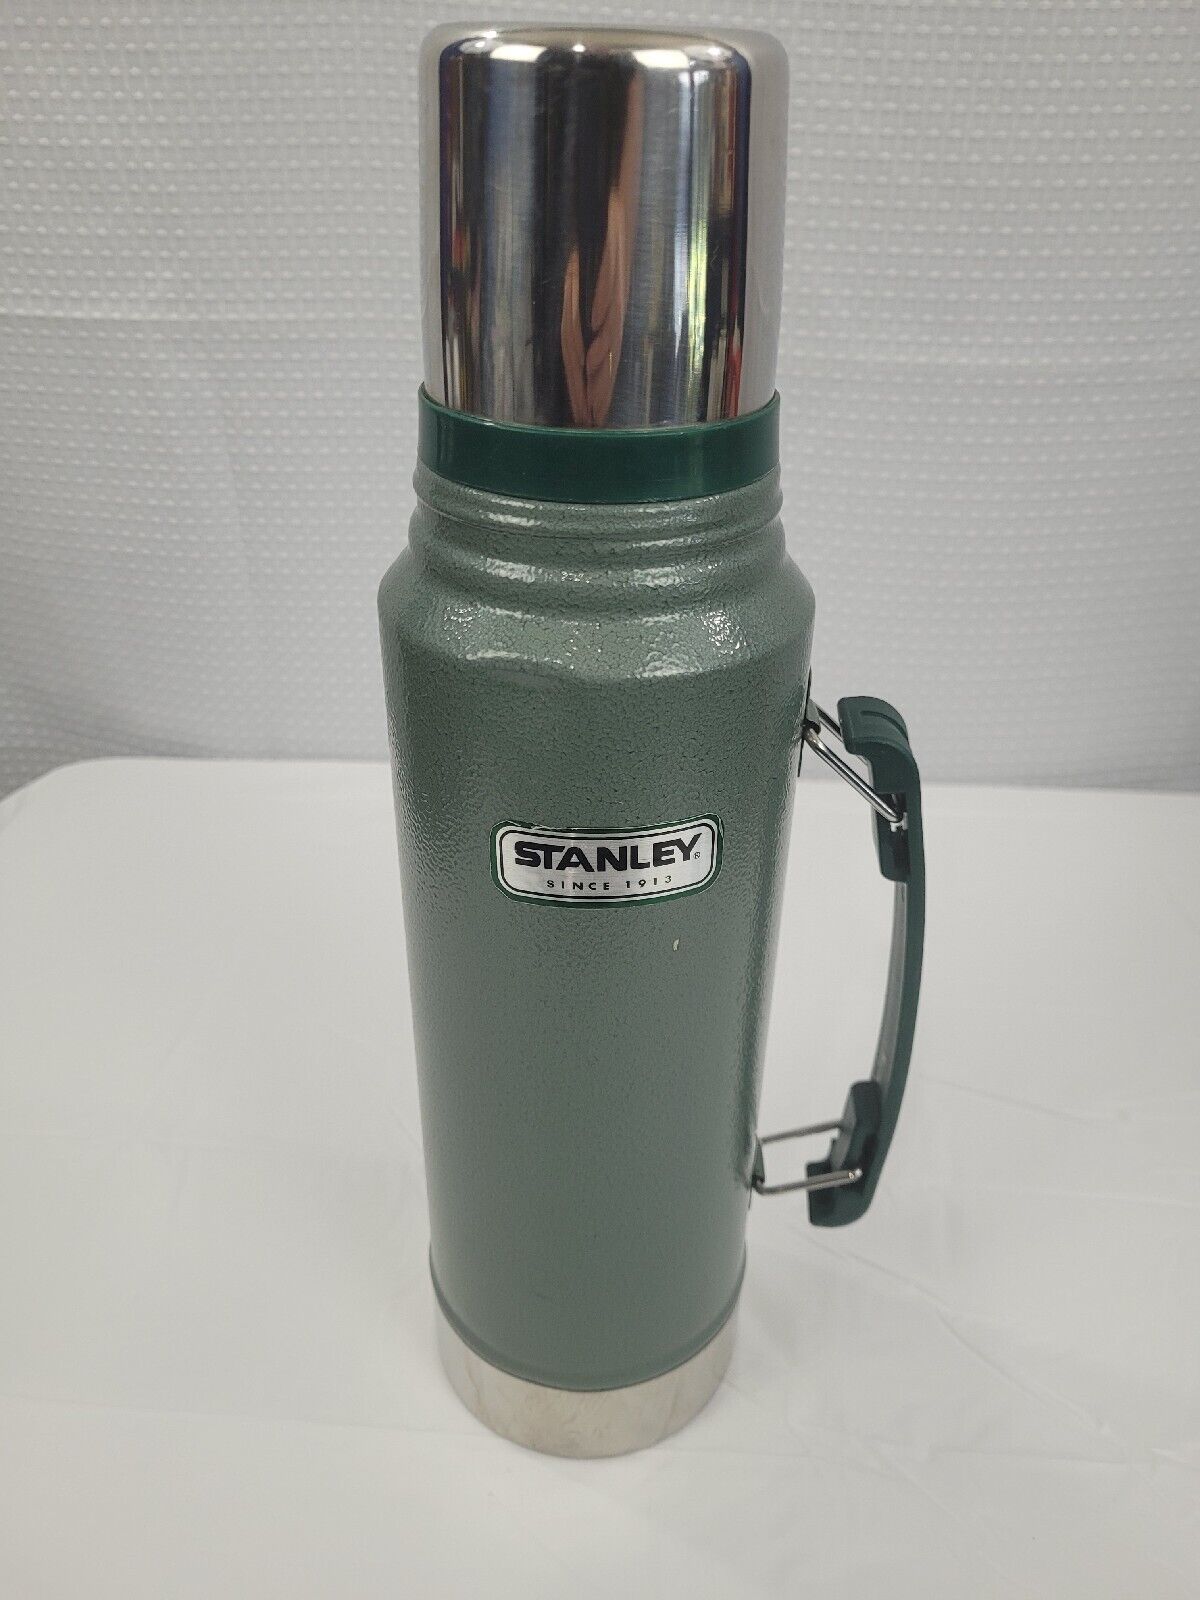 Stanley 1.1qt Insulated Thermos 20-00554 Classic Stainless Steel